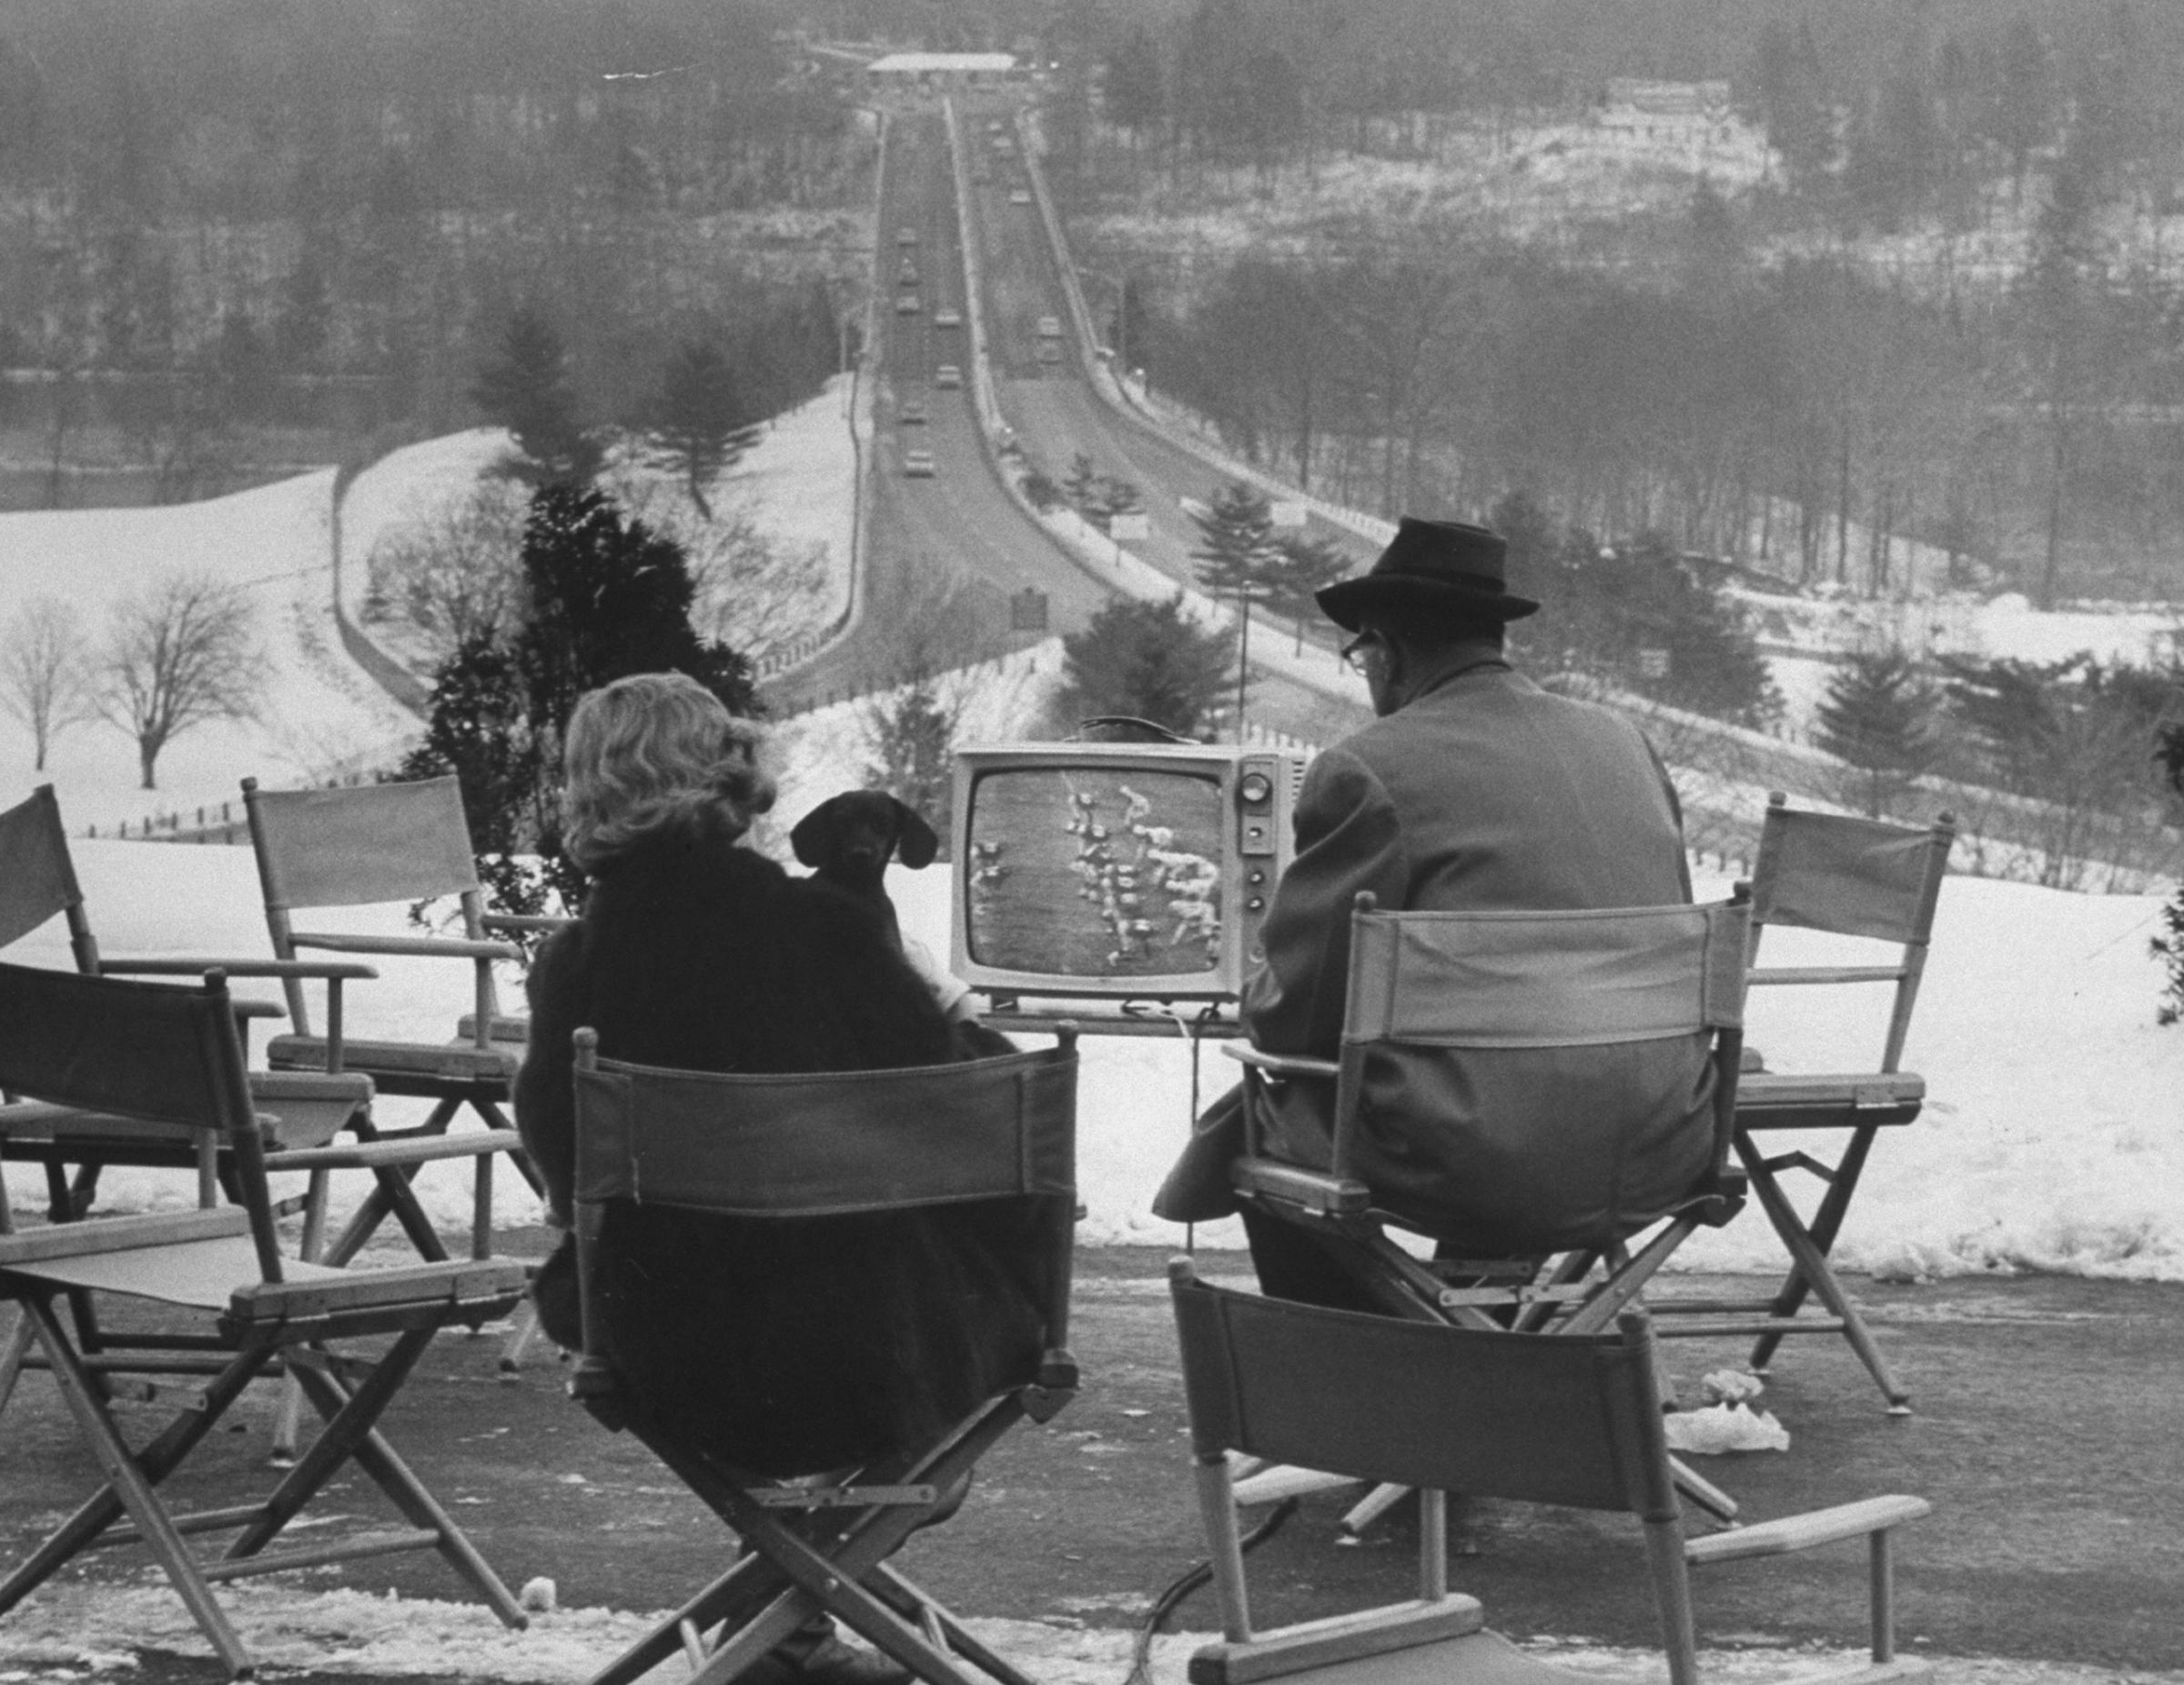 Die-hard New York Giants fans watch the 1962 NFL championship game against the Packers outside a Connecticut motel, beyond the range of the NYC-area TV blackout, December 1962. Green Bay won, 16-7.